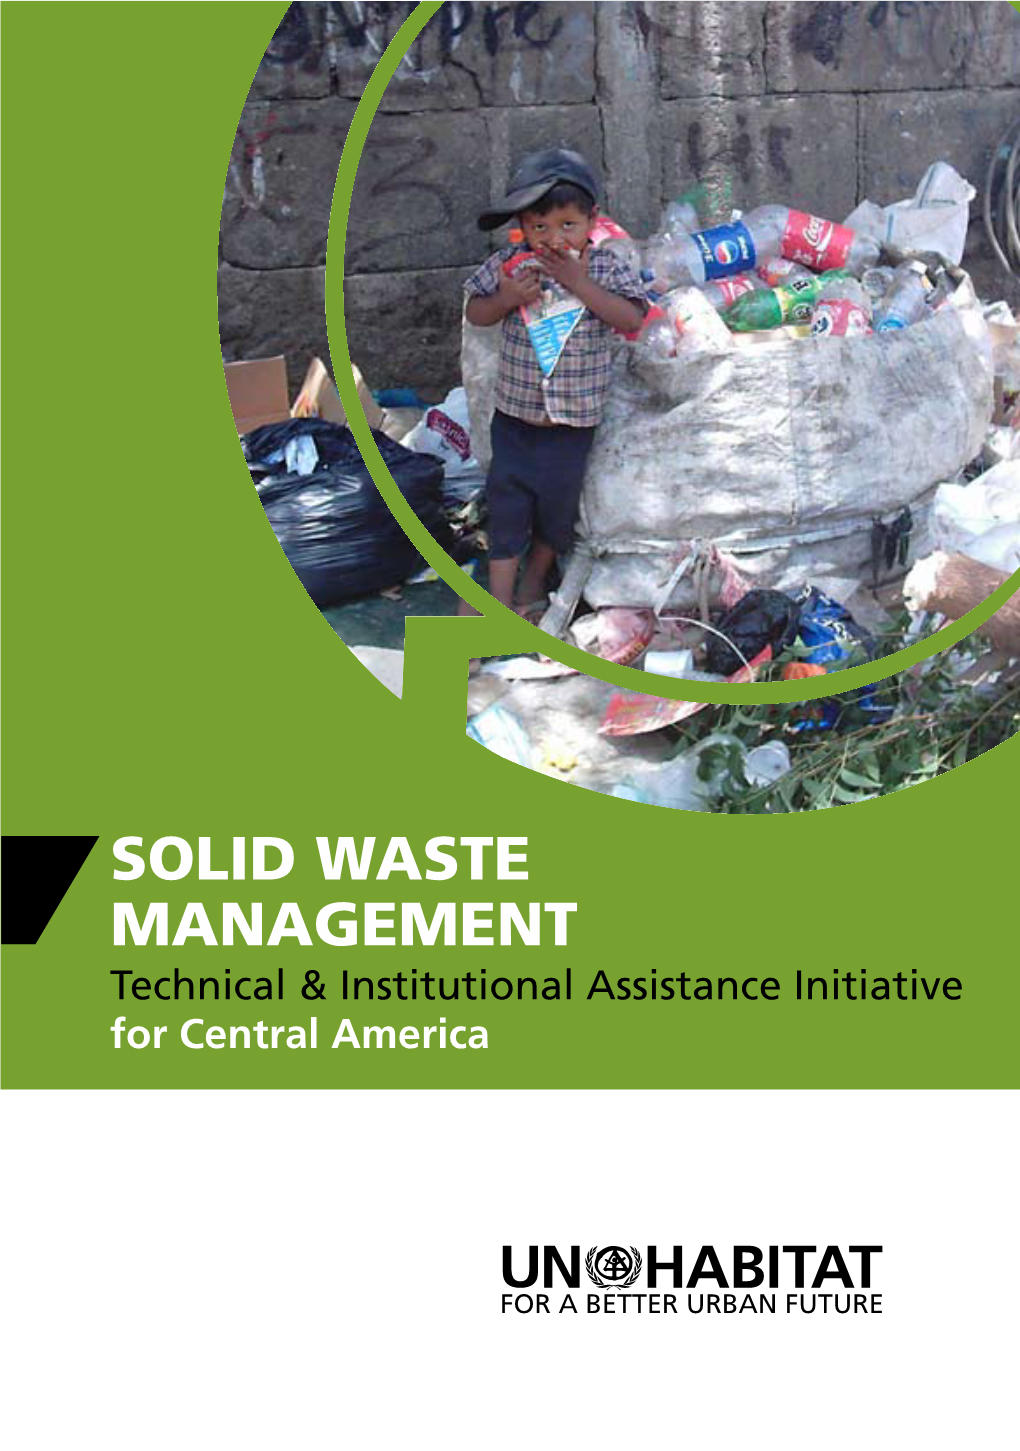 Solid Waste Management Technical & Institutional Assistance Initiative for Central America